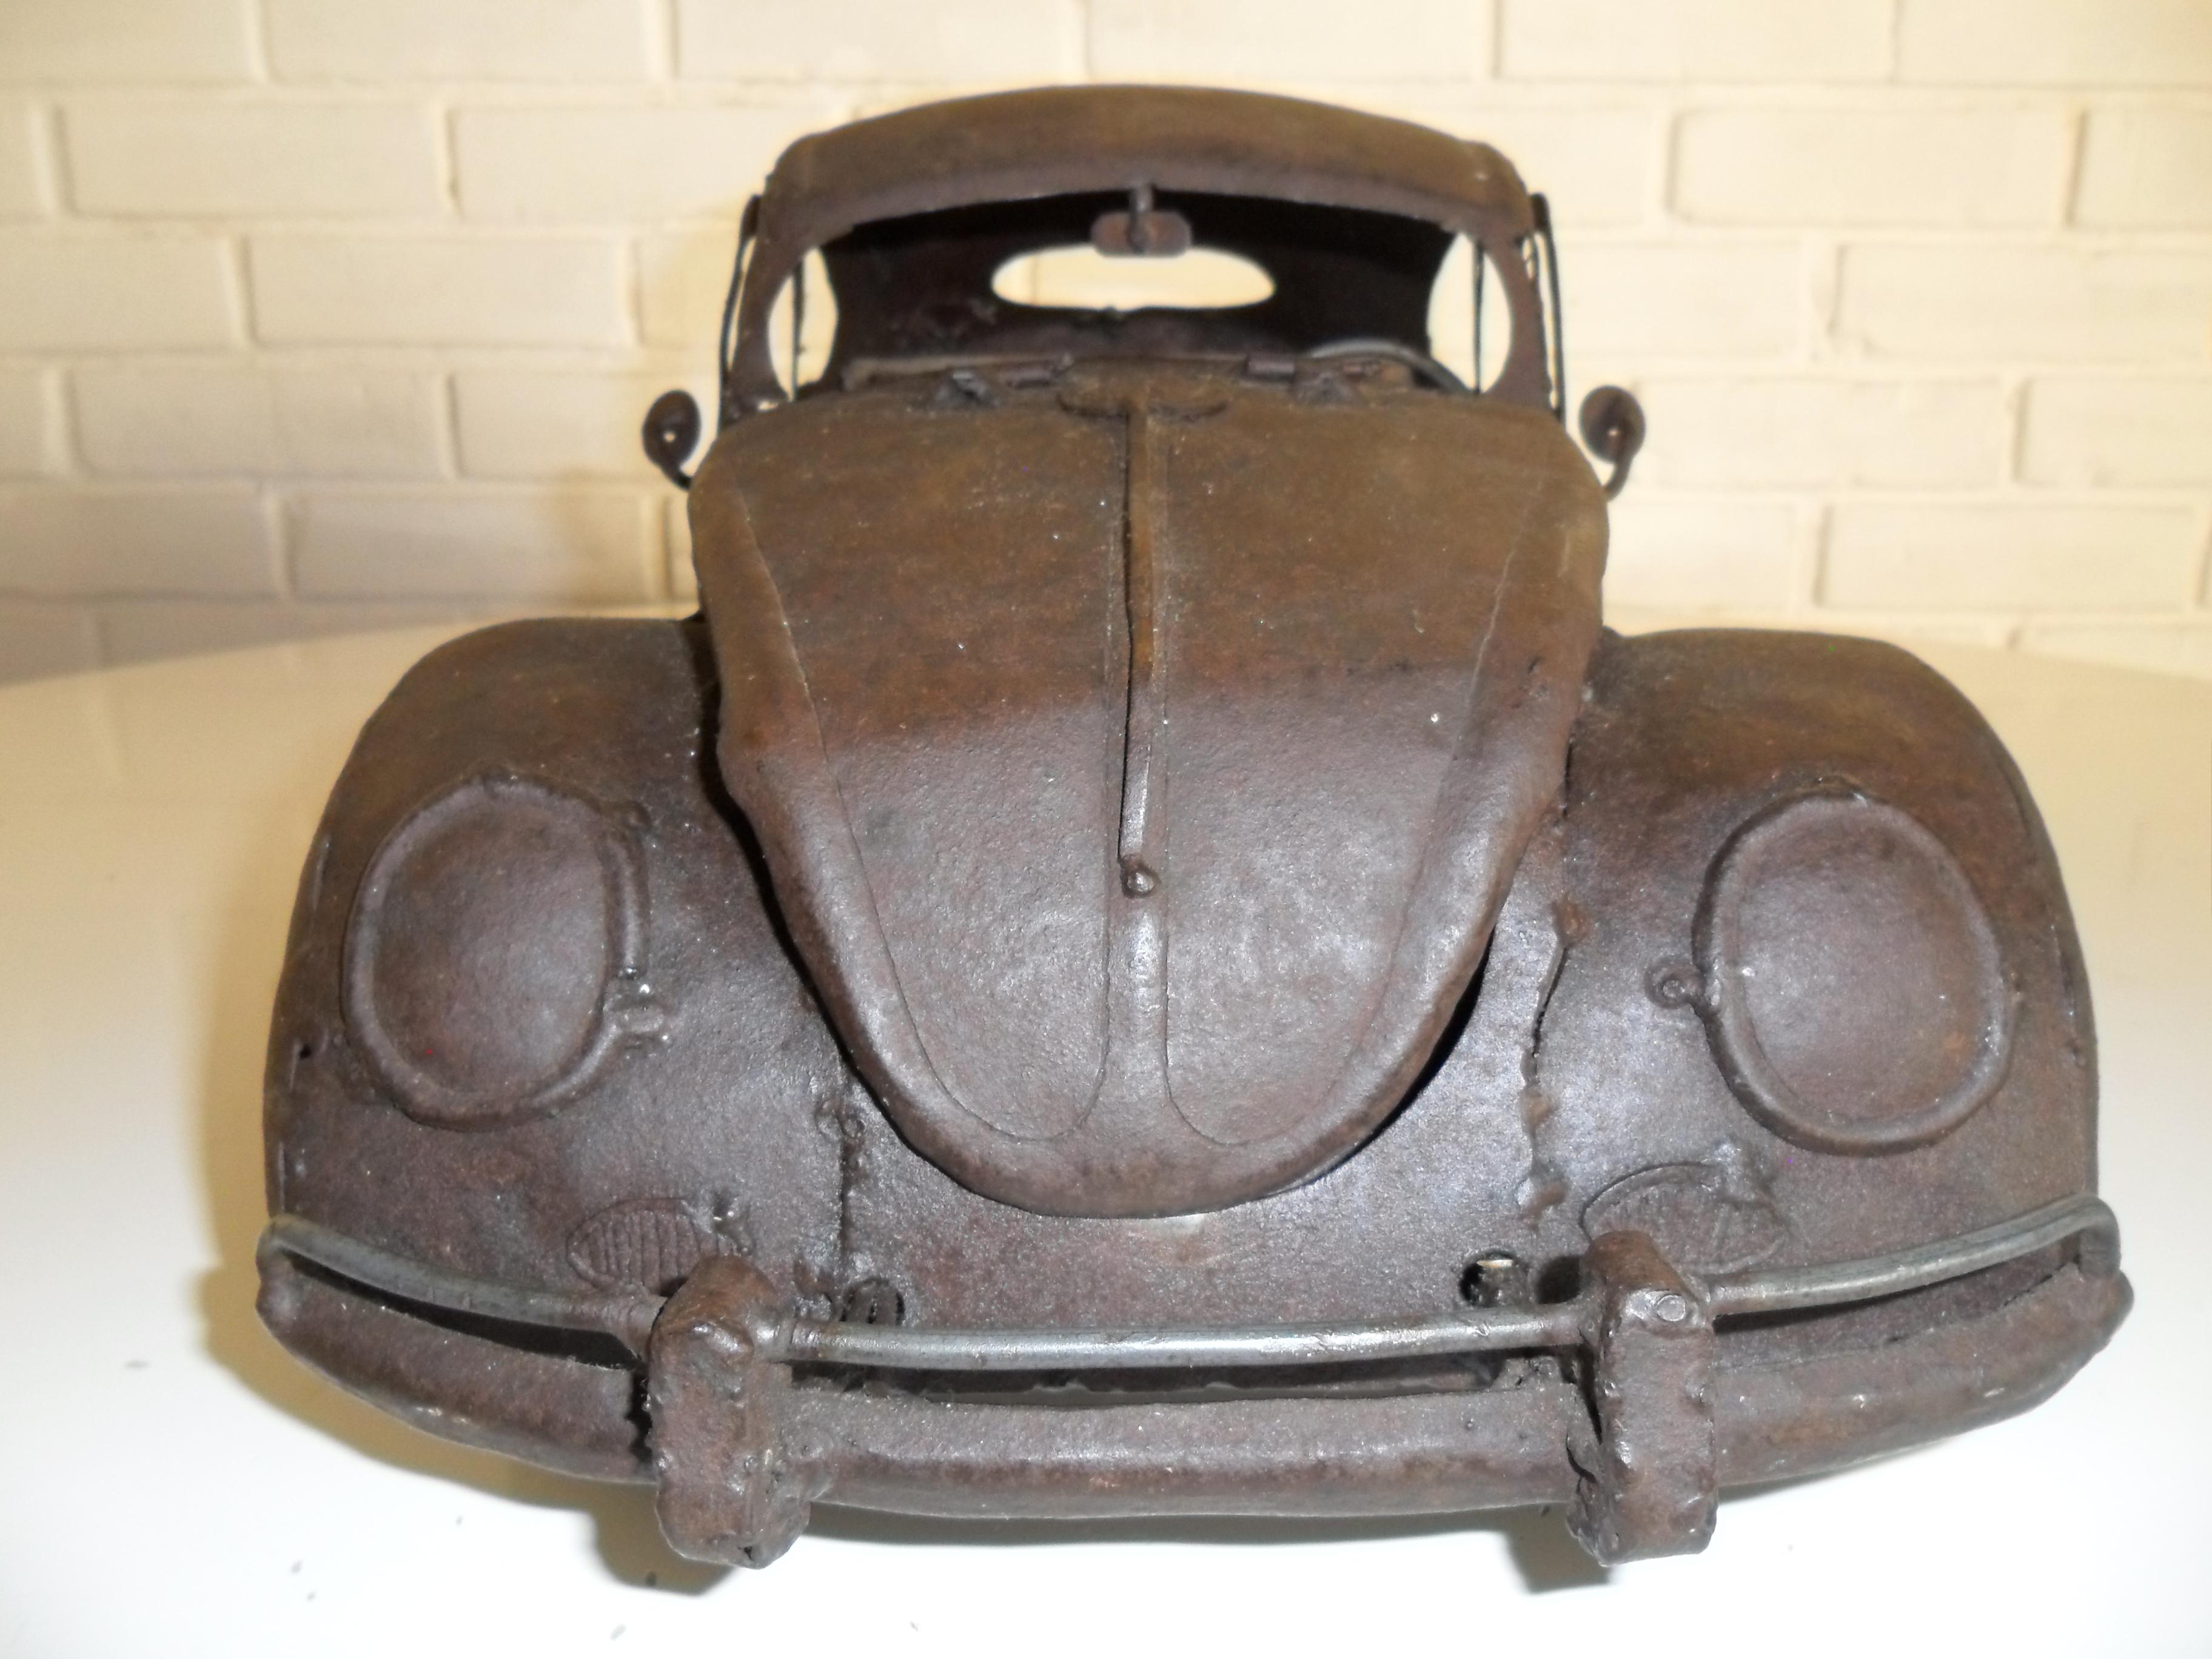 Stunning vintage brutalist VW Beetle Sculpture by Metalsmith Antonio Fortanel.
(The most rare and desirable of his pieces).
Early piece.
Mexico City, circa 1968.
  